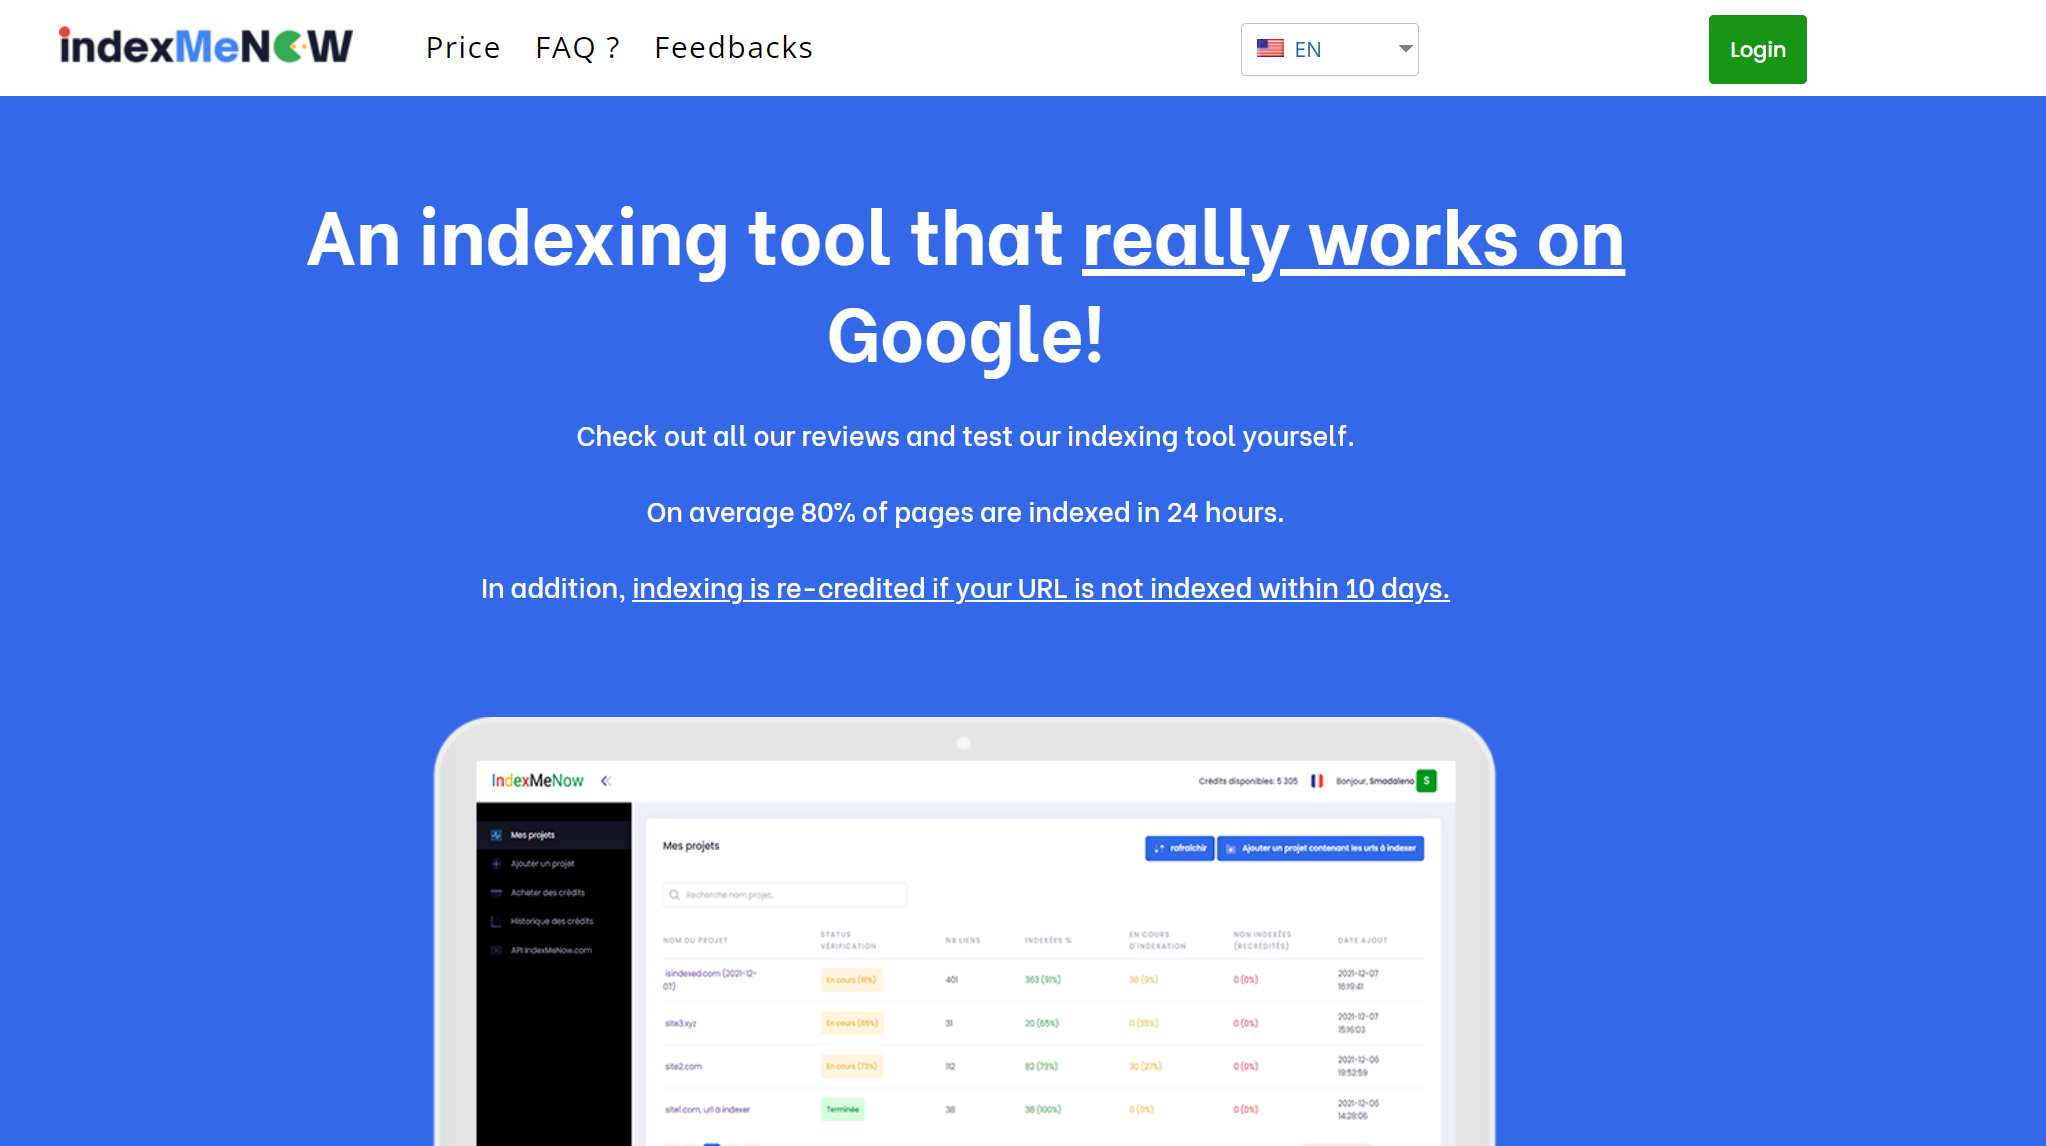 Indexmenow for fast indexing on Google.